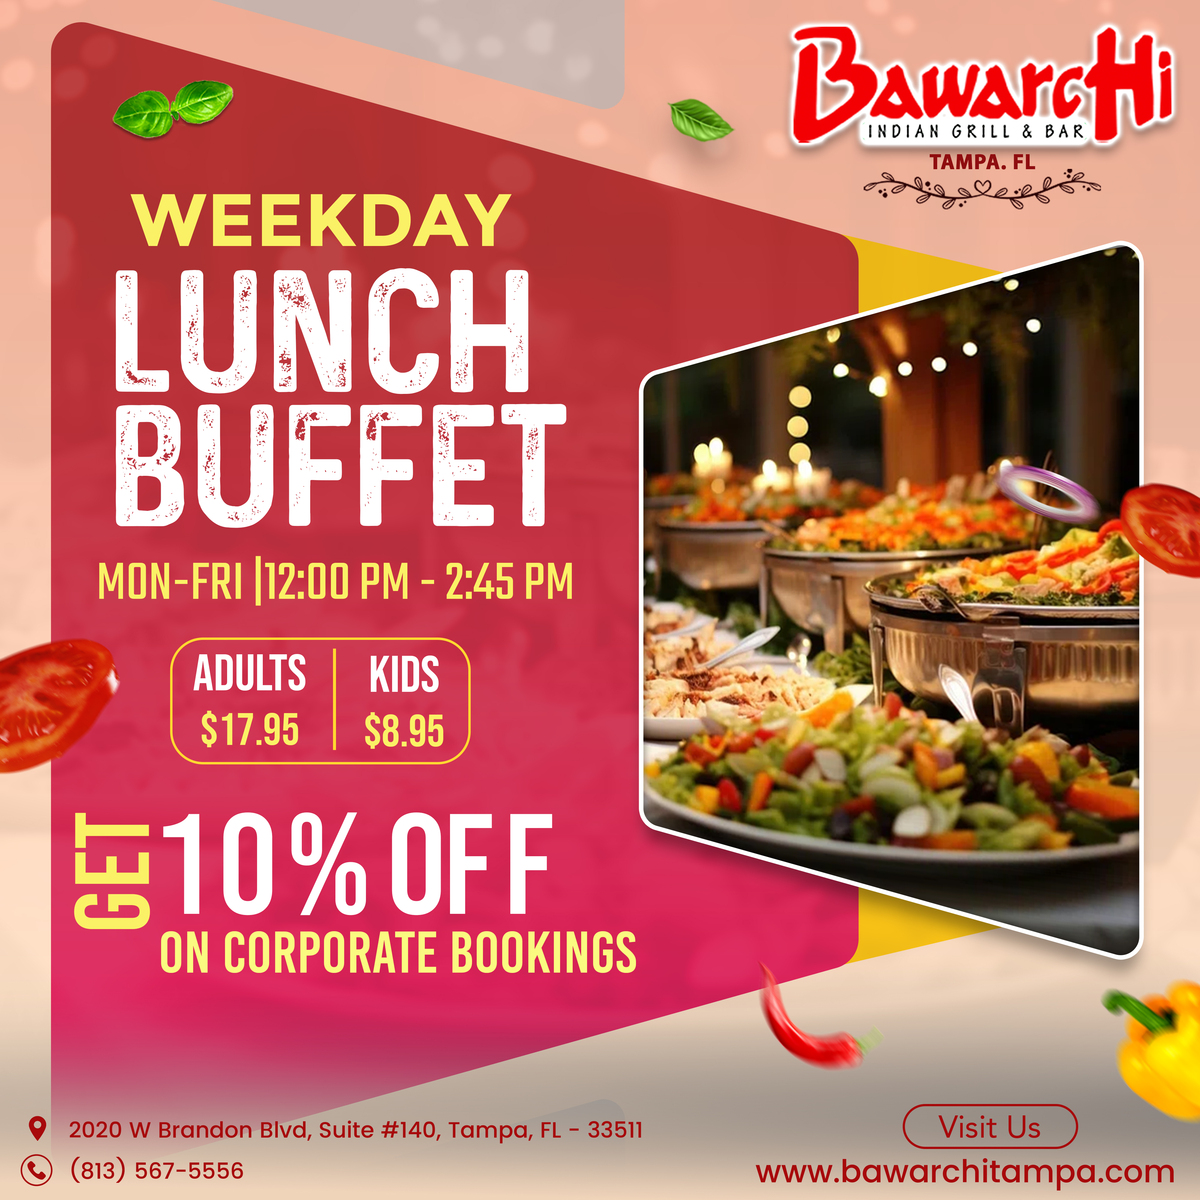 Elevate your weekday lunch experience with our delectable buffet at Bawarchi Tampa! Join us for a feast that fits your schedule!